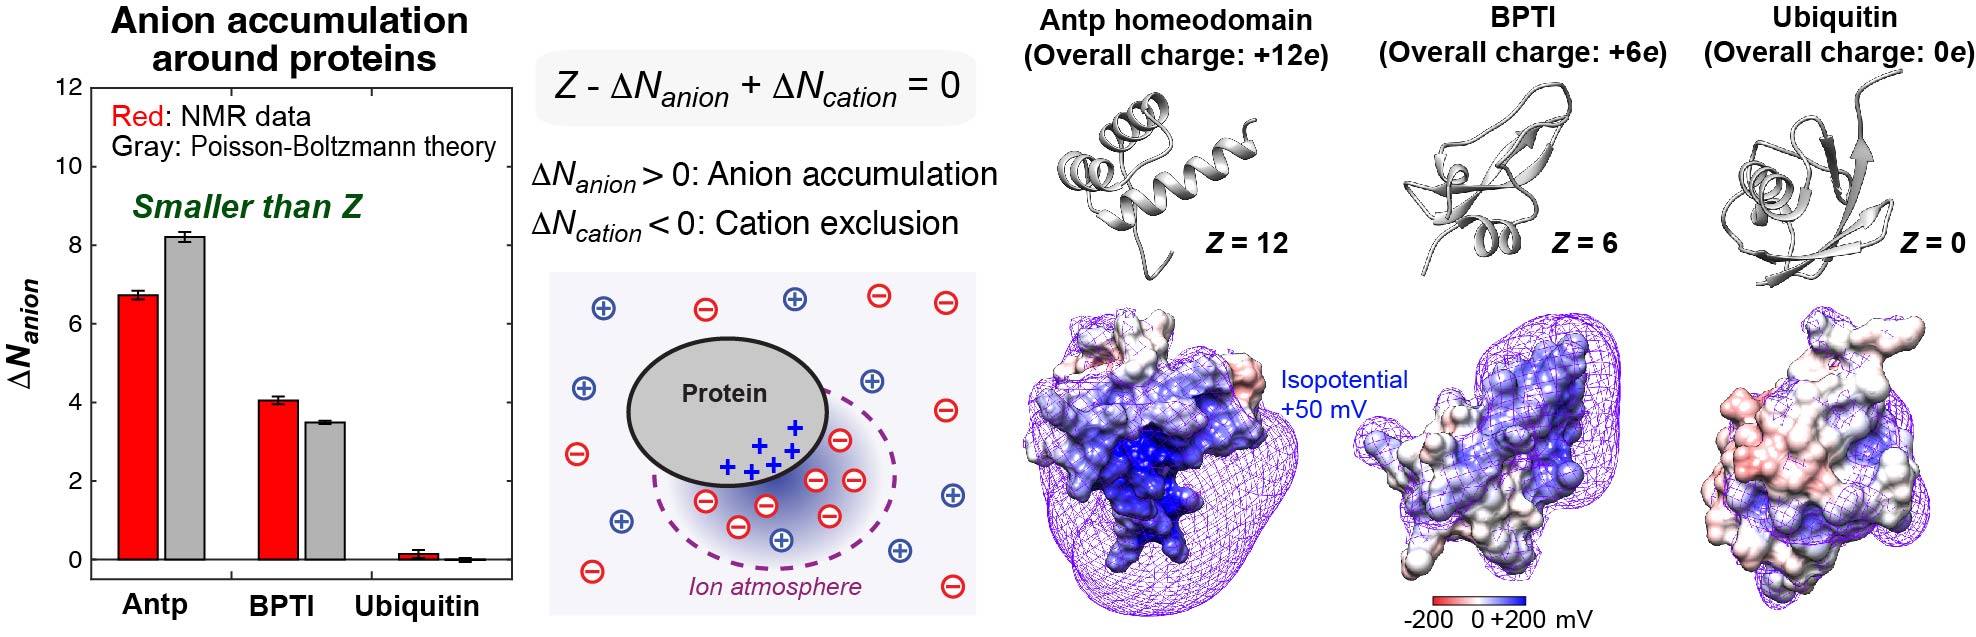 Anion accumulation around positively charged proteins